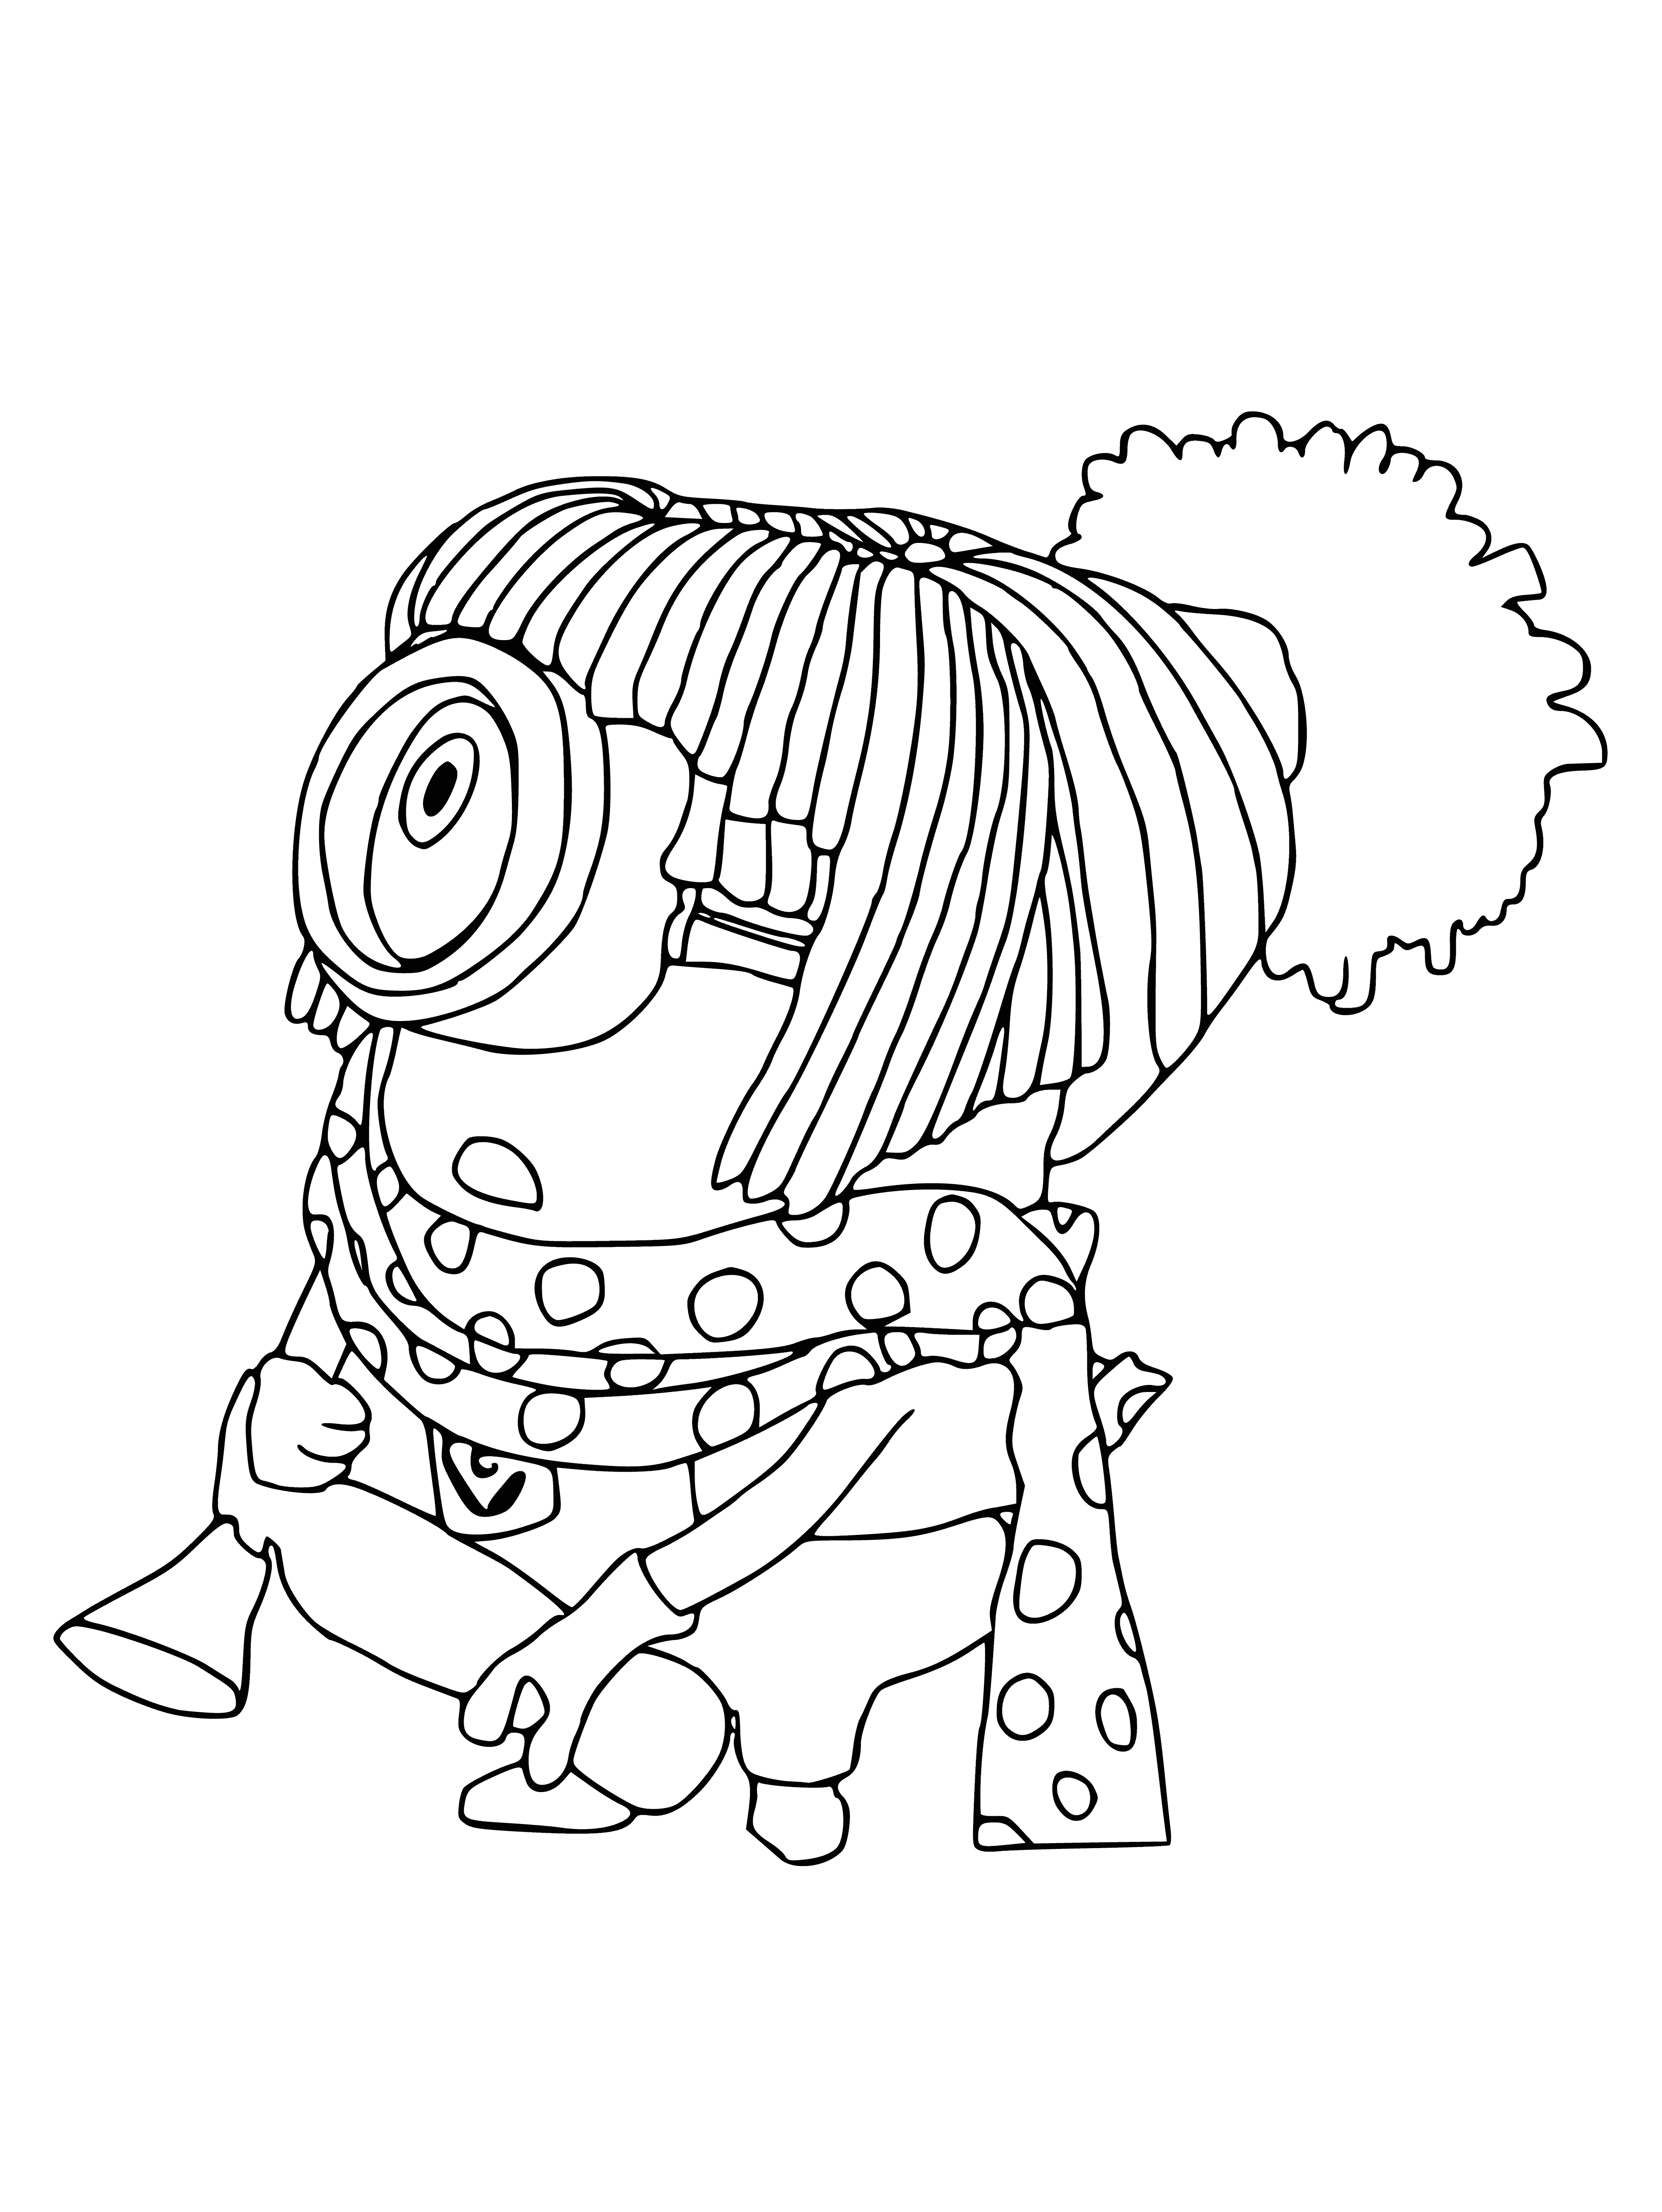 coloring page: Minion from 'Despicable Me' holding a teddy bear & chocolates wearing a heart t-shirt, looking happy. #cute